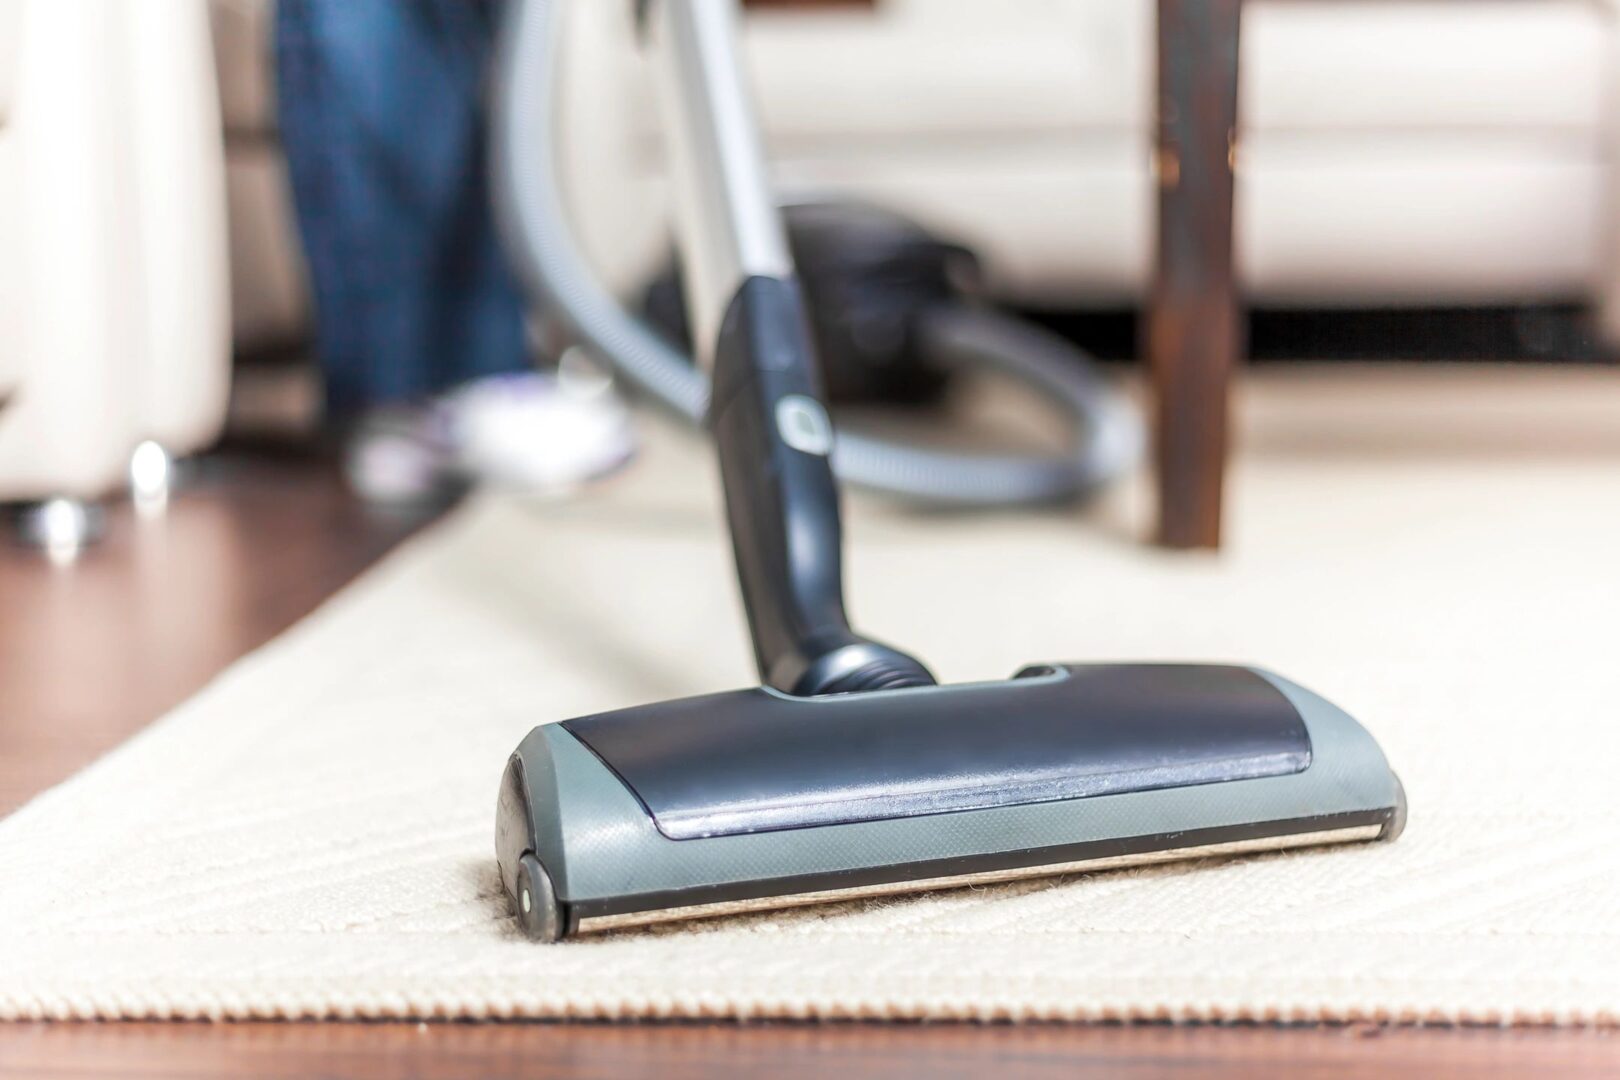 A vacuum cleaner is on the floor near a chair.